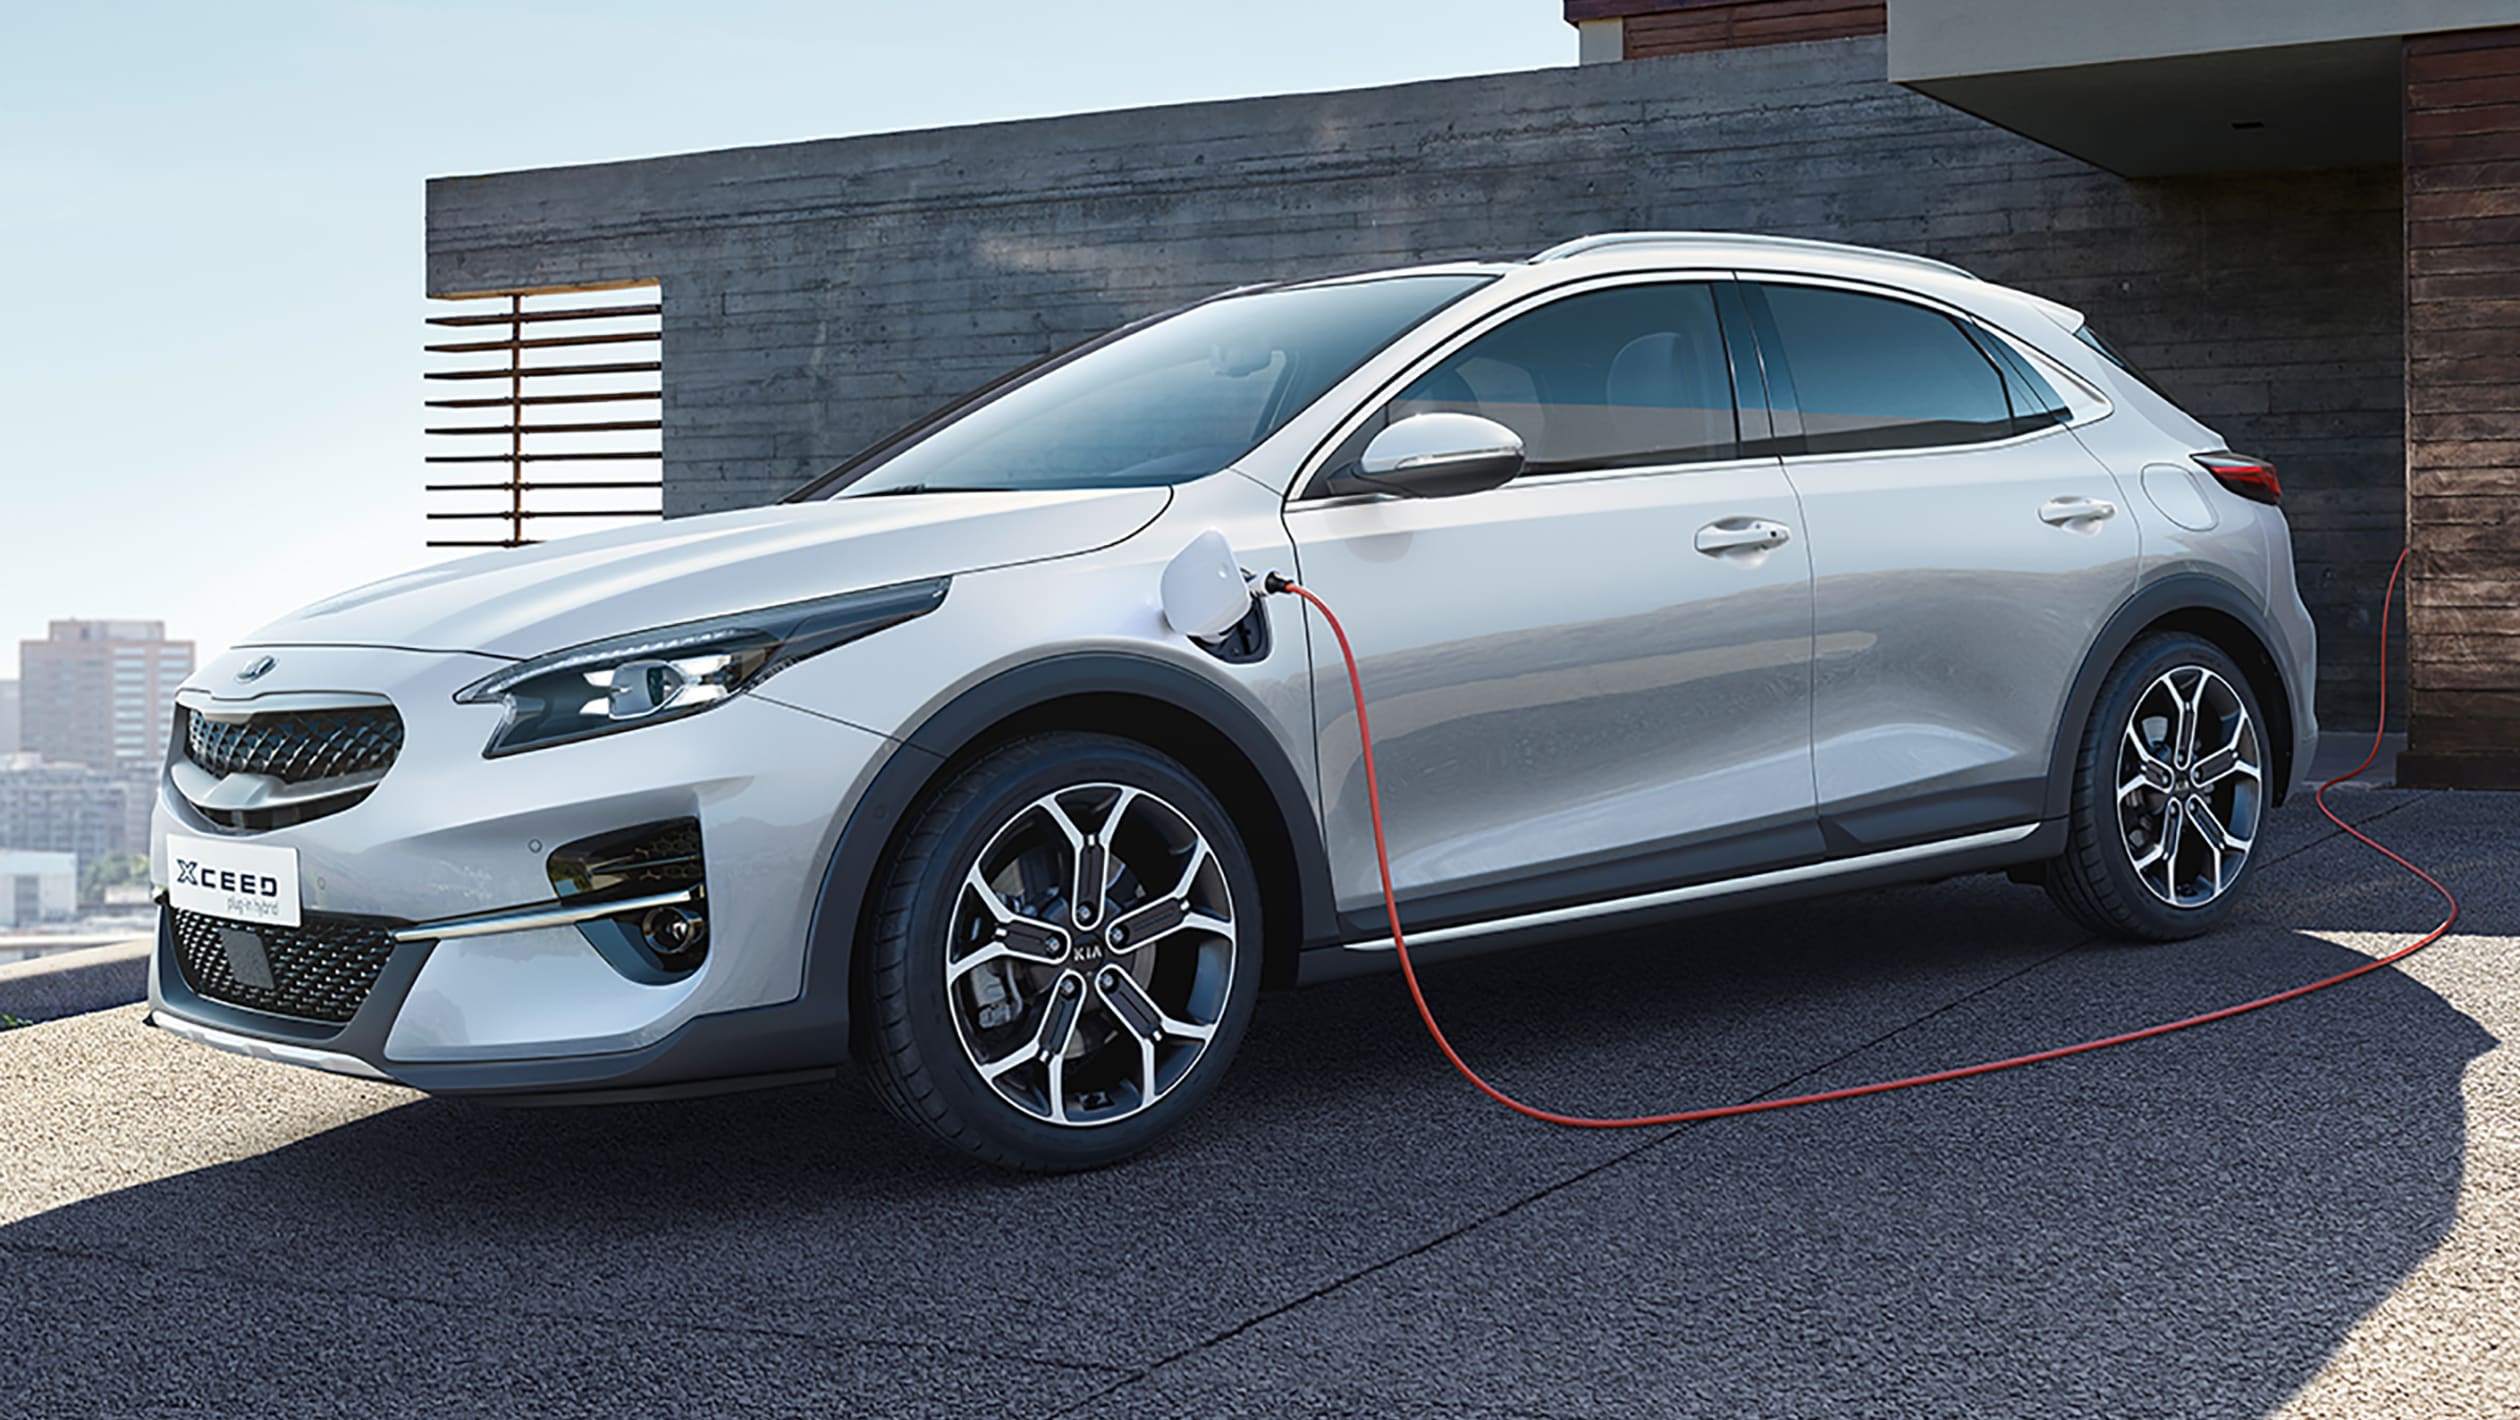 New 2020 Kia XCeed PHEV prices, specs and release date Auto Express